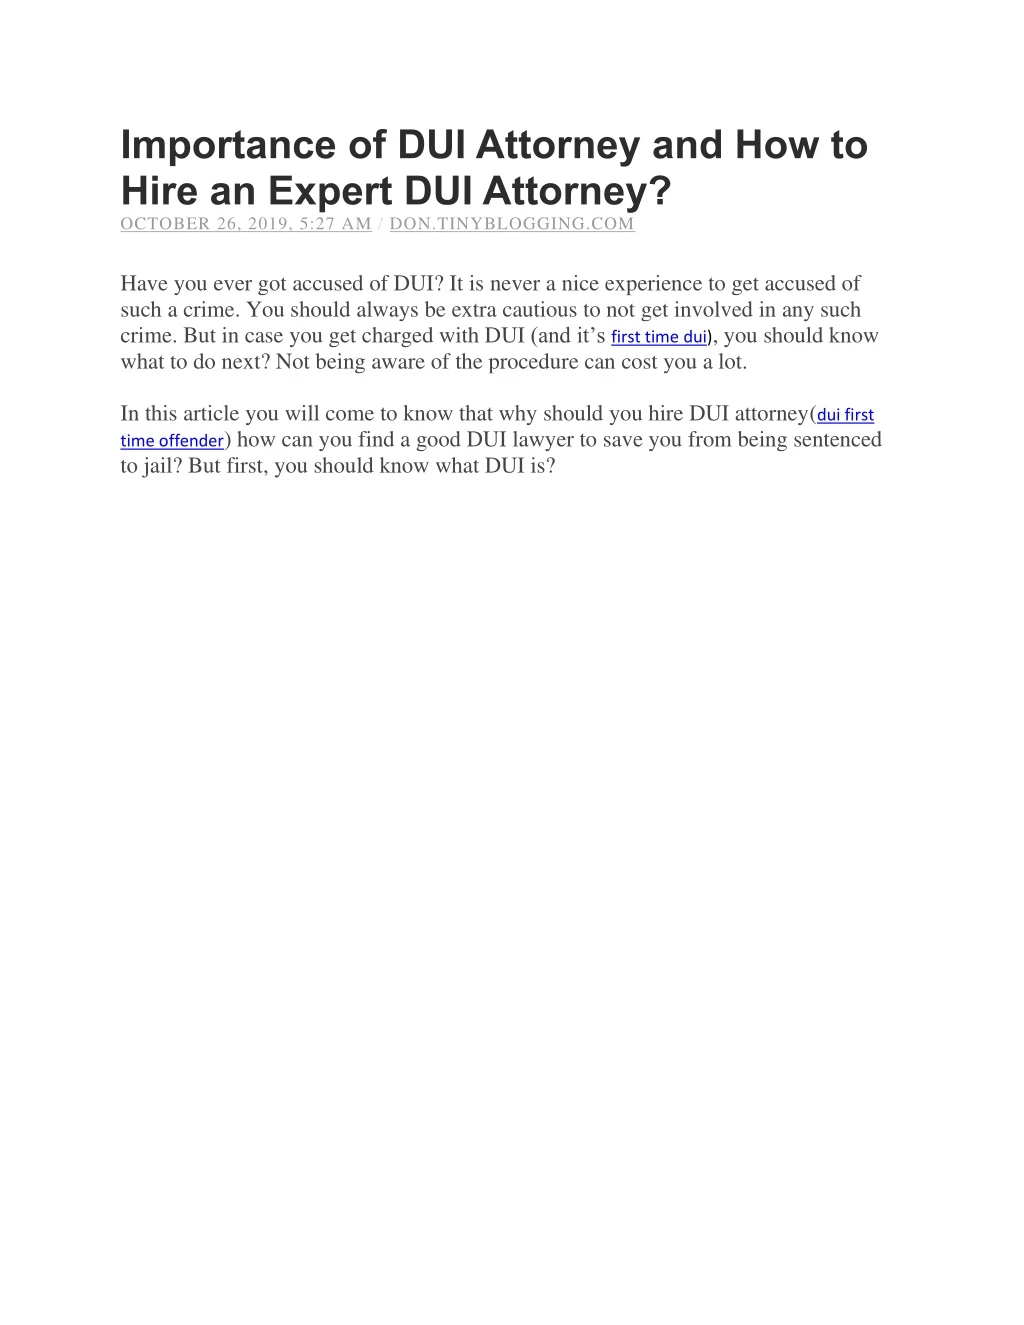 importance of dui attorney and how to hire